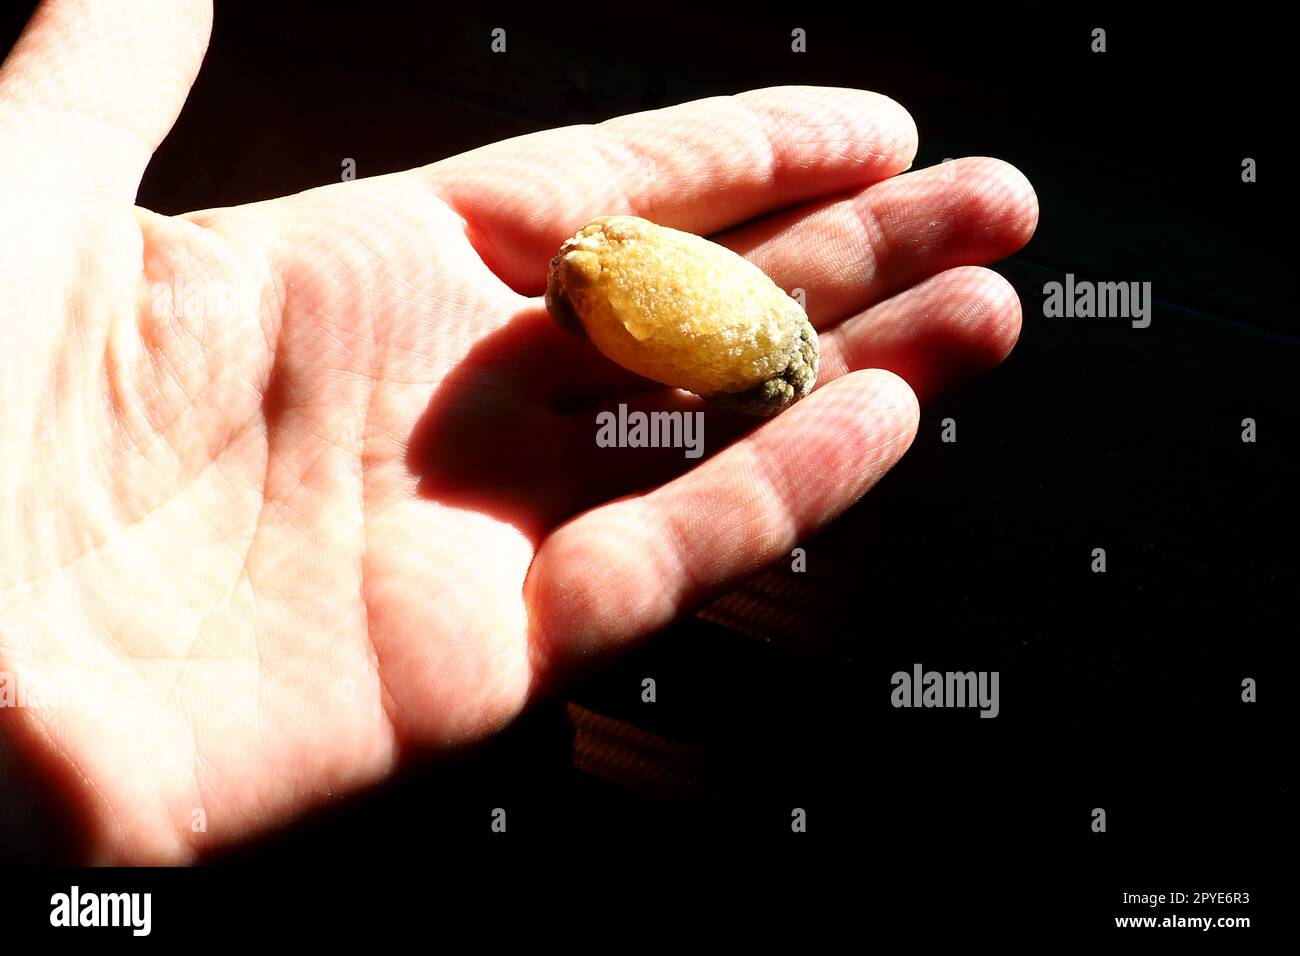 Gallstone disease, cholelithiasis - the formation of stones, stones in the gallbladder, bile ducts. Gallstones. A large gallstone removed from a patient's body, 2.5 cm long. Stock Photo